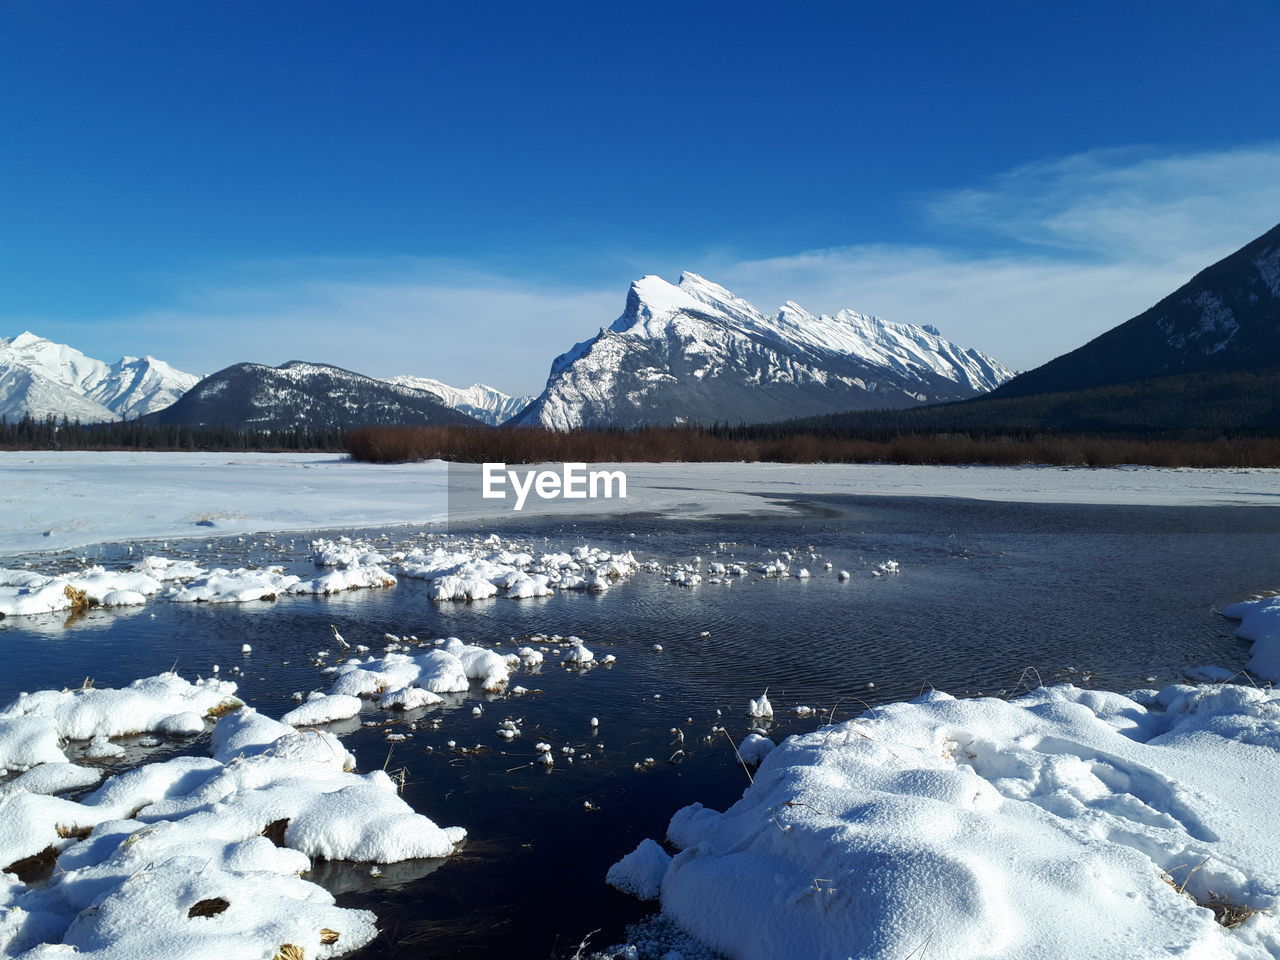 SCENIC VIEW OF FROZEN LAKE AGAINST SNOWCAPPED MOUNTAINS DURING WINTER